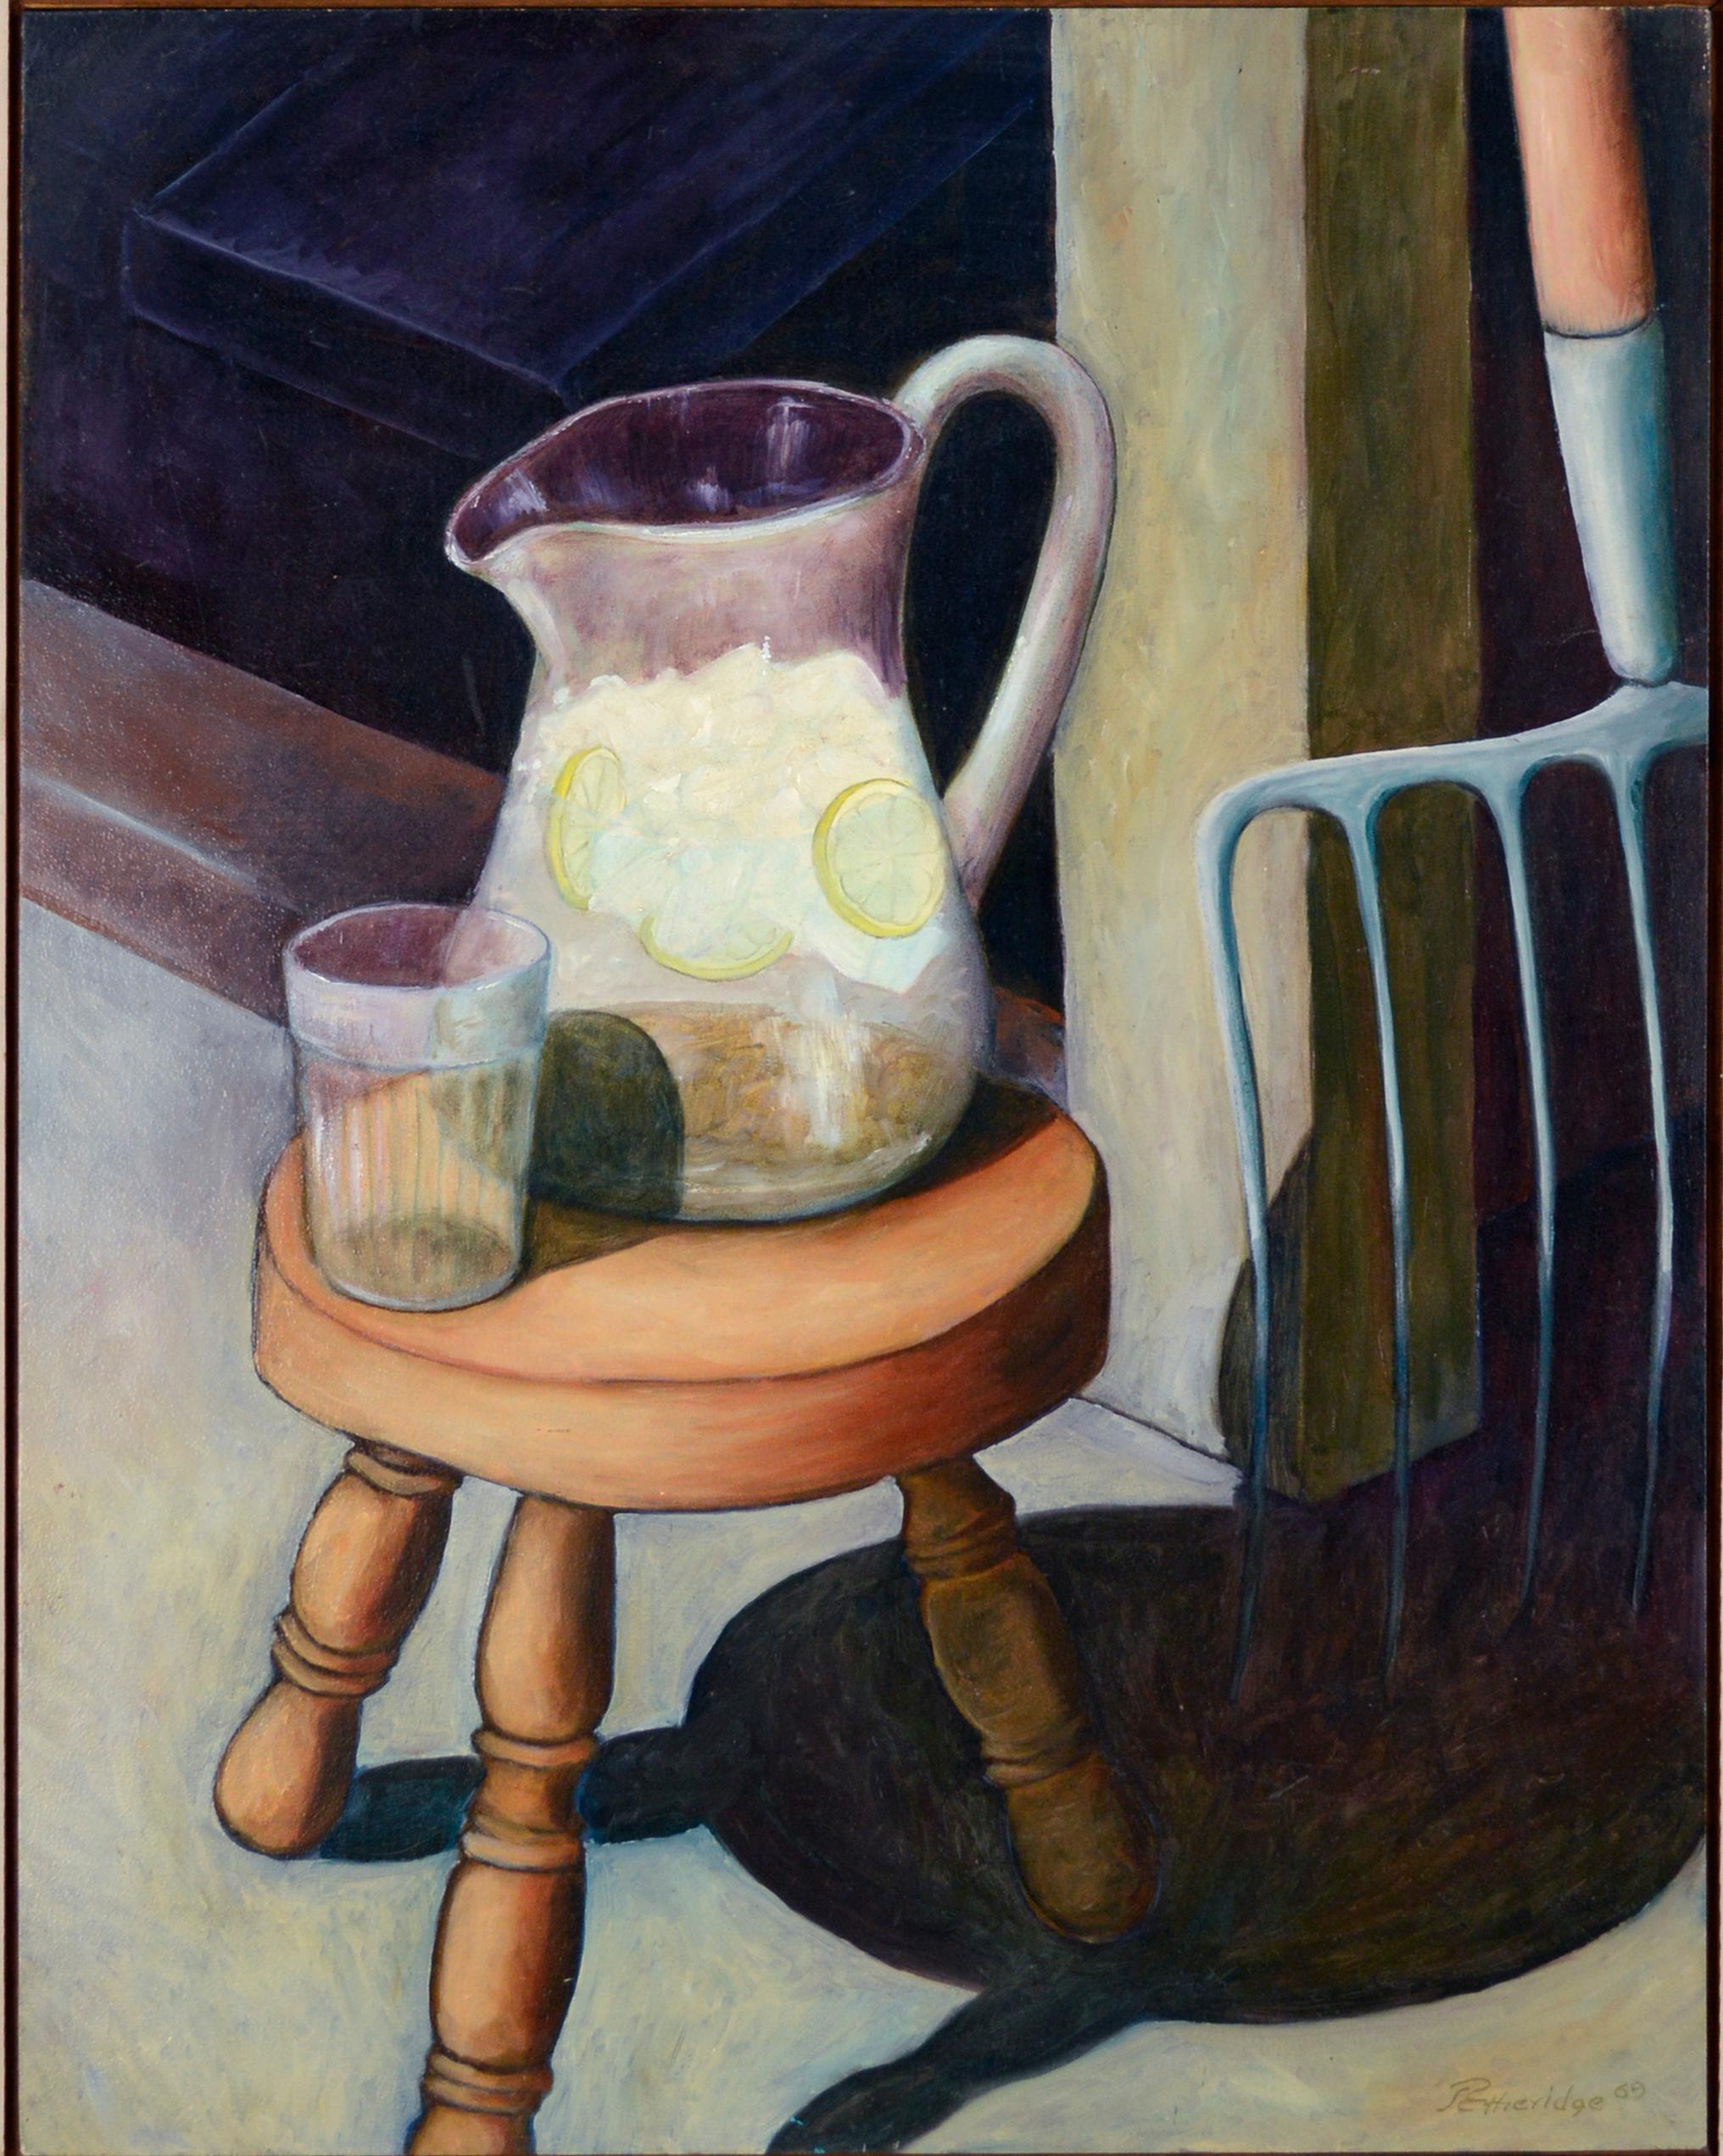 After the Chores comes Cold Lemonade Milking Stool Still Life - Painting by Etheridge